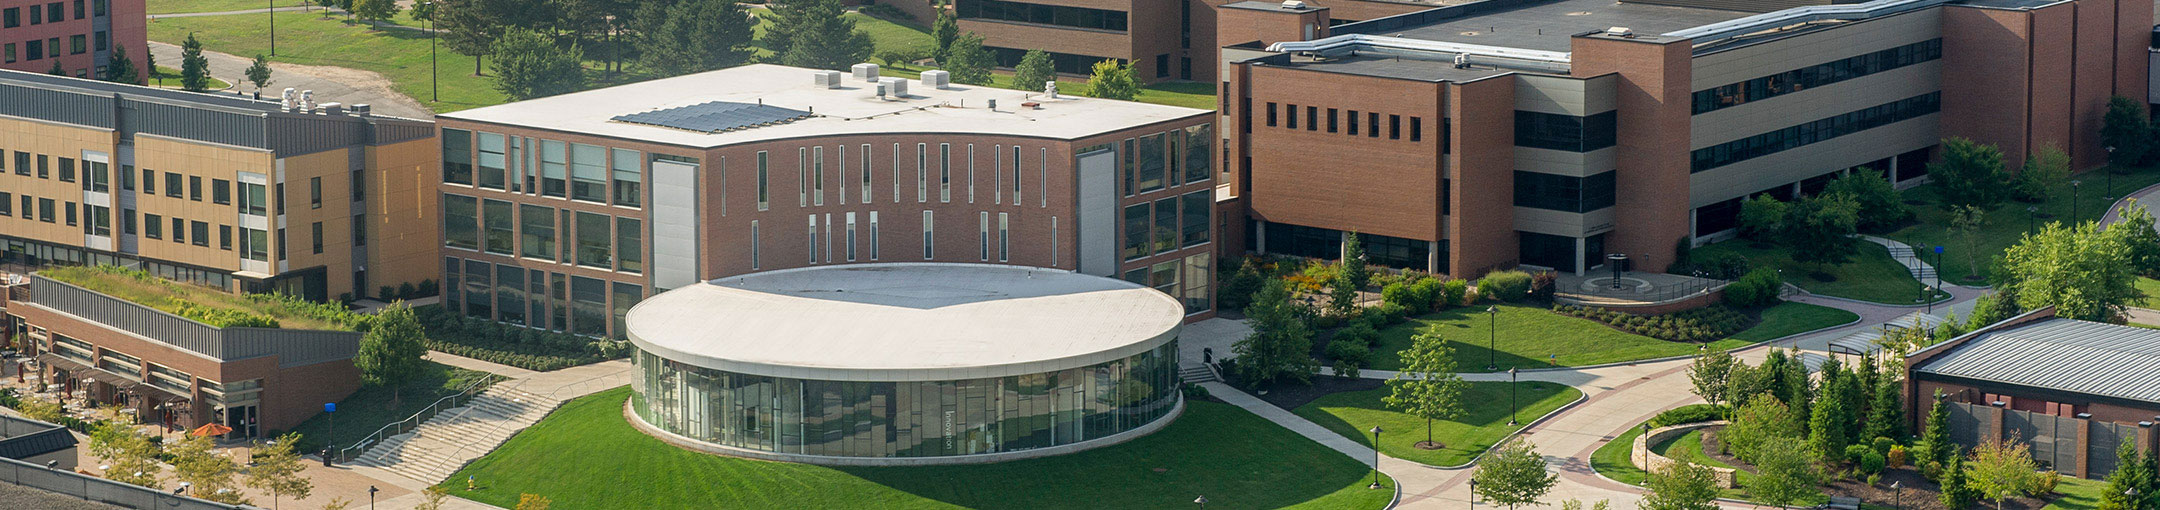 Aerial view of the R I T campus, featuring the Albert J. Simone Center for Innovation and Entrepreneurship.